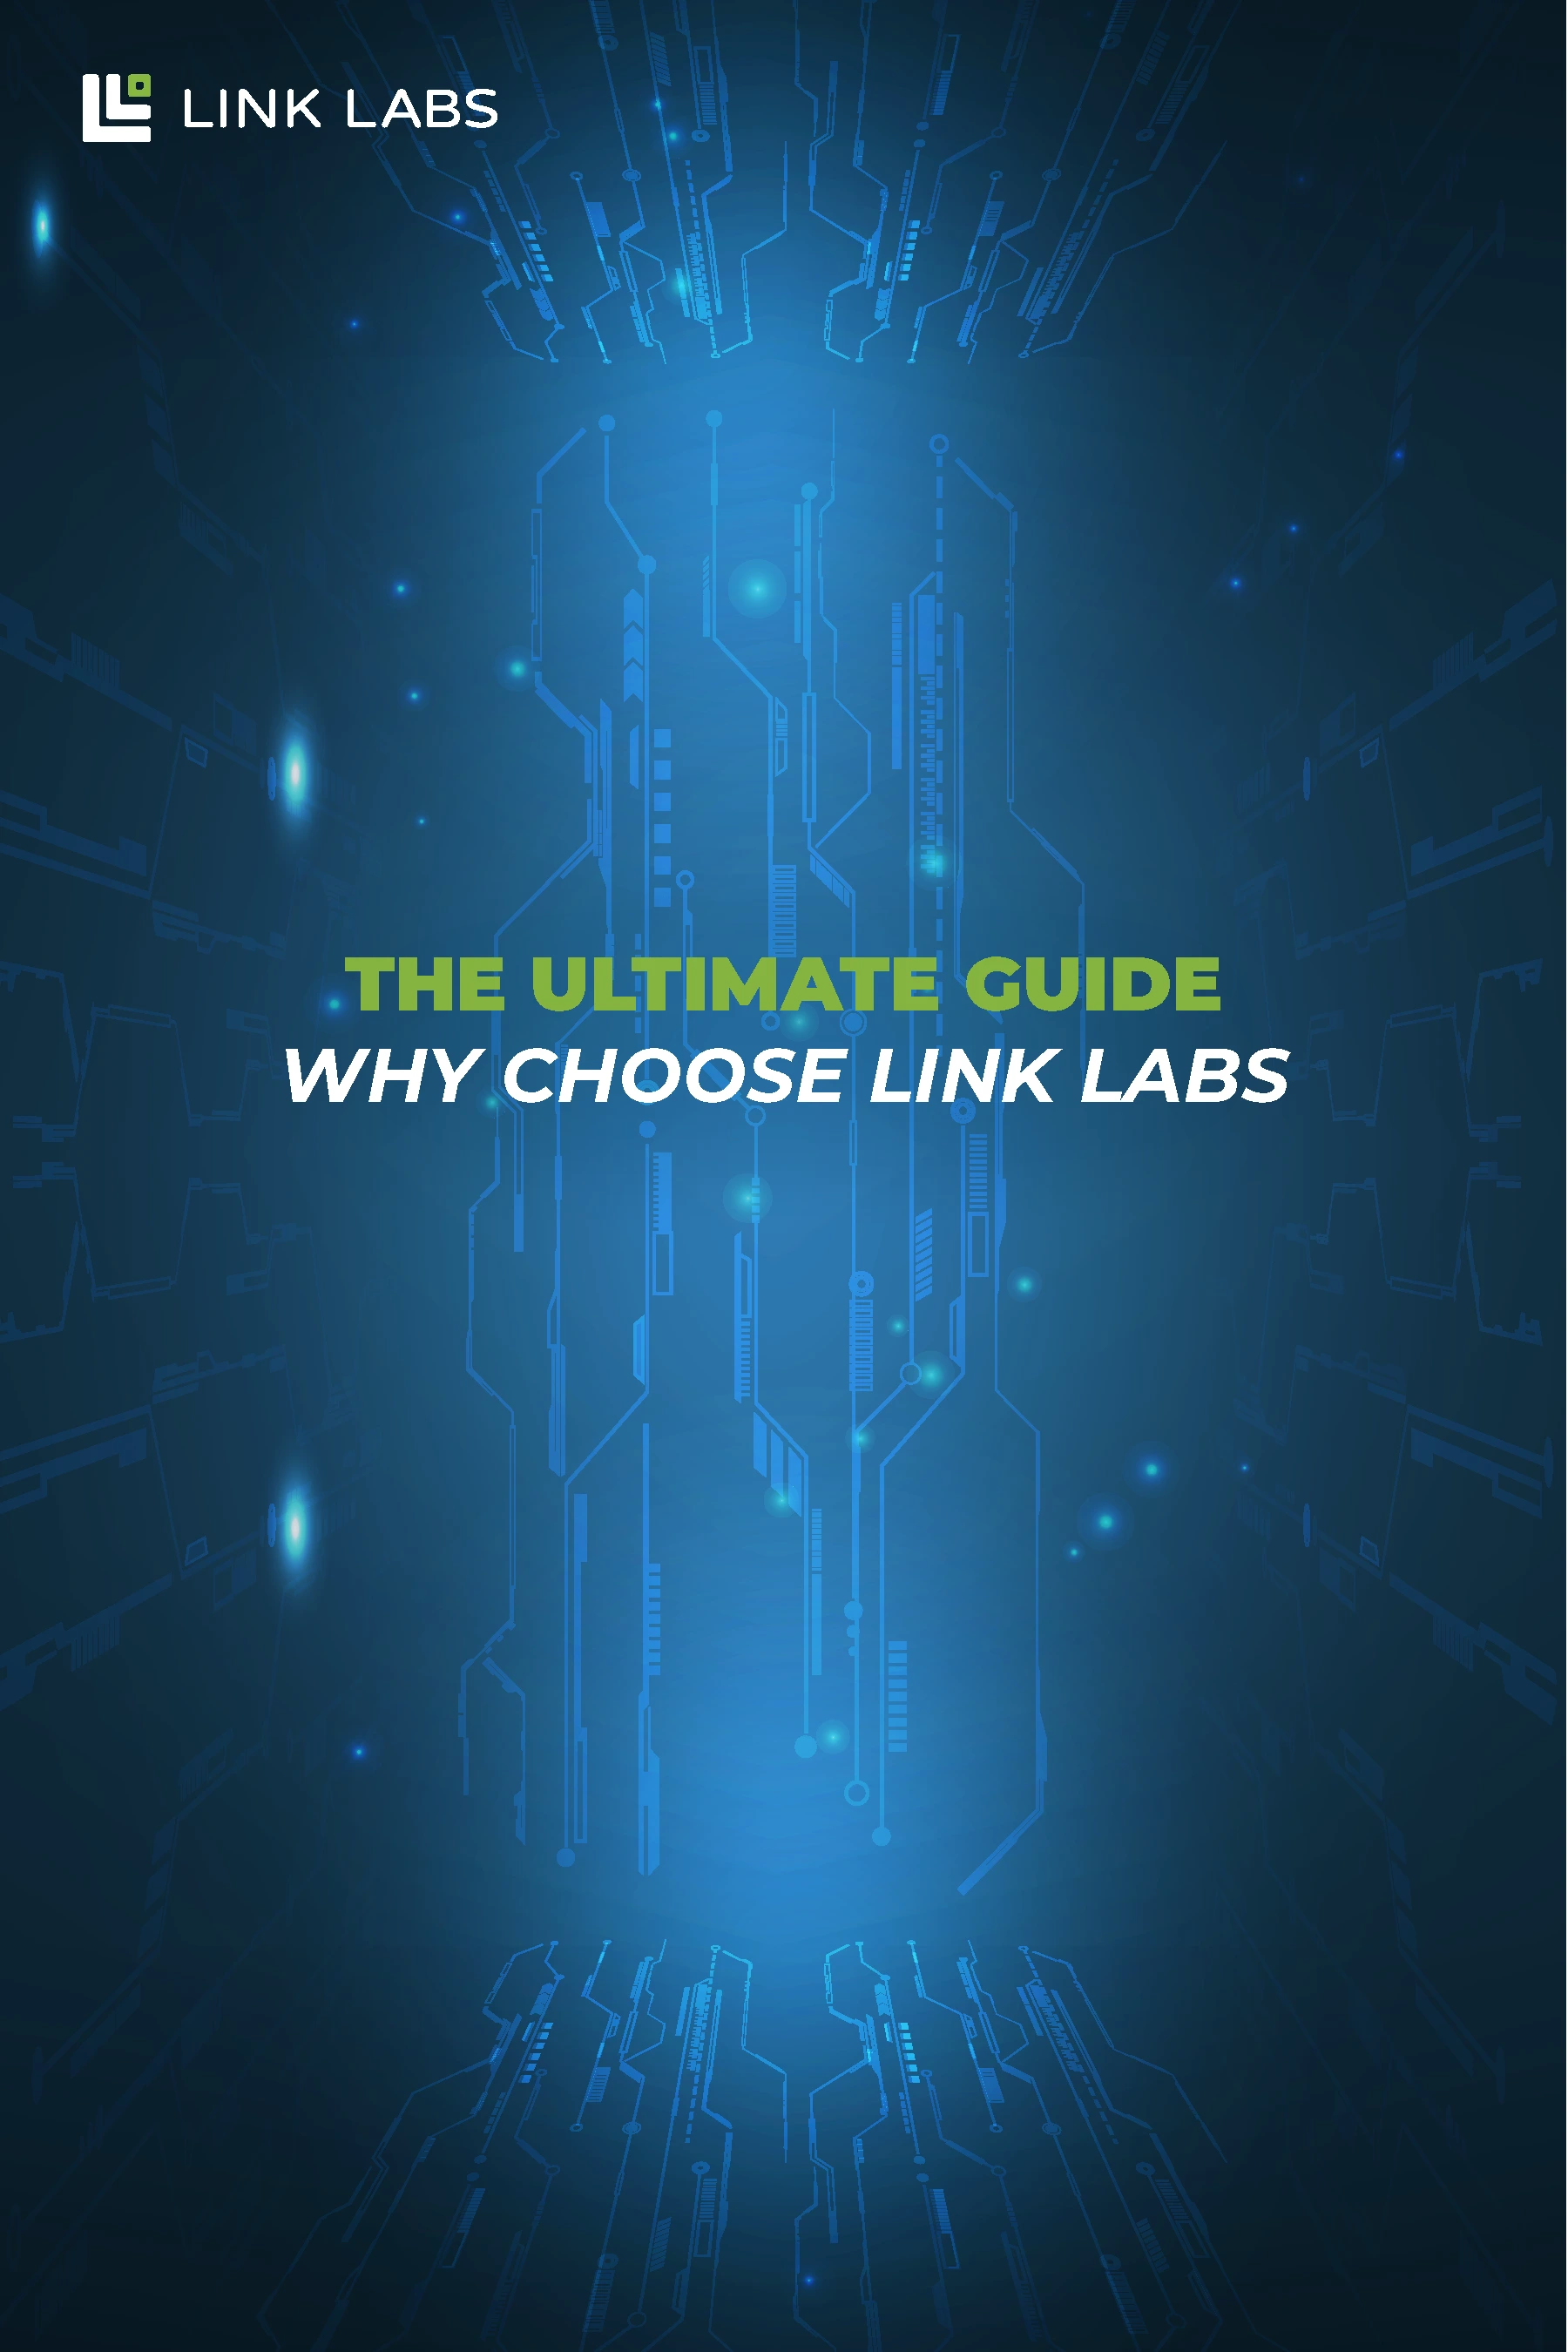 Thumbnail-The Ultimate Guide Why Choose Link Labs-01